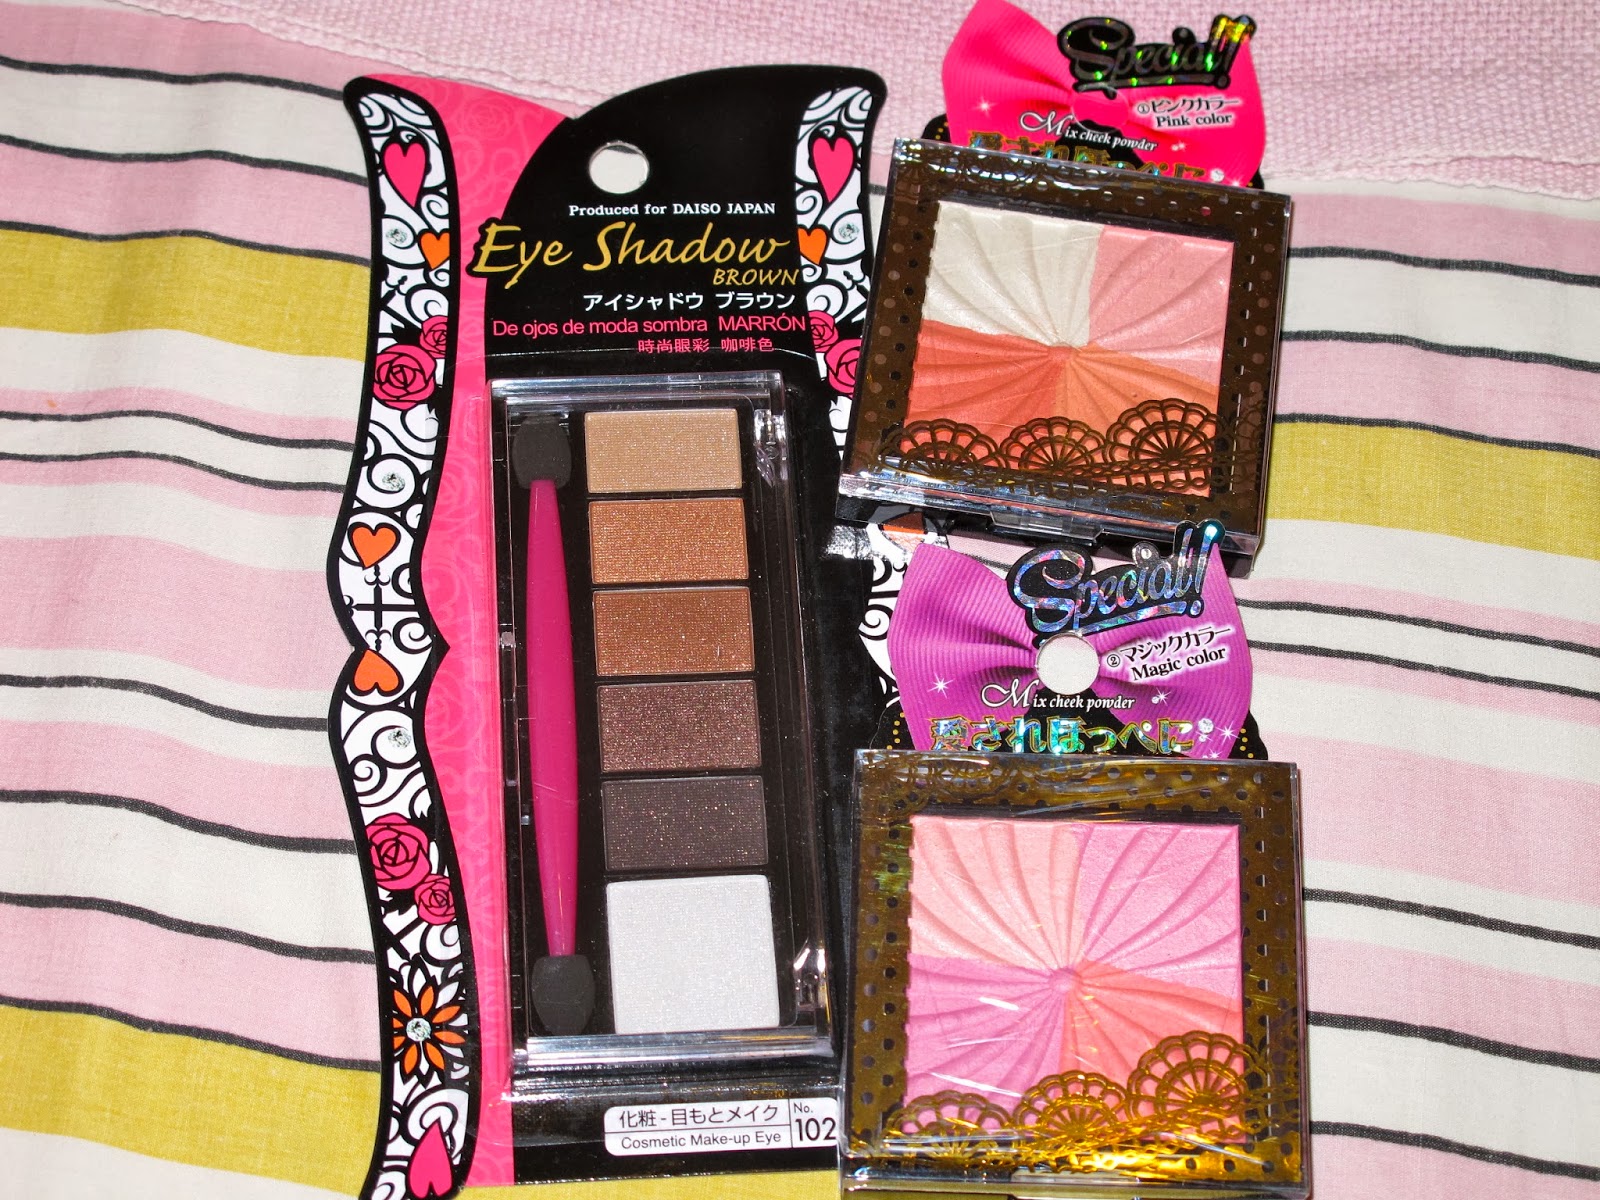 Beauty And Fashion Habitue Review Daiso Eyeshadow Palette And Images, Photos, Reviews